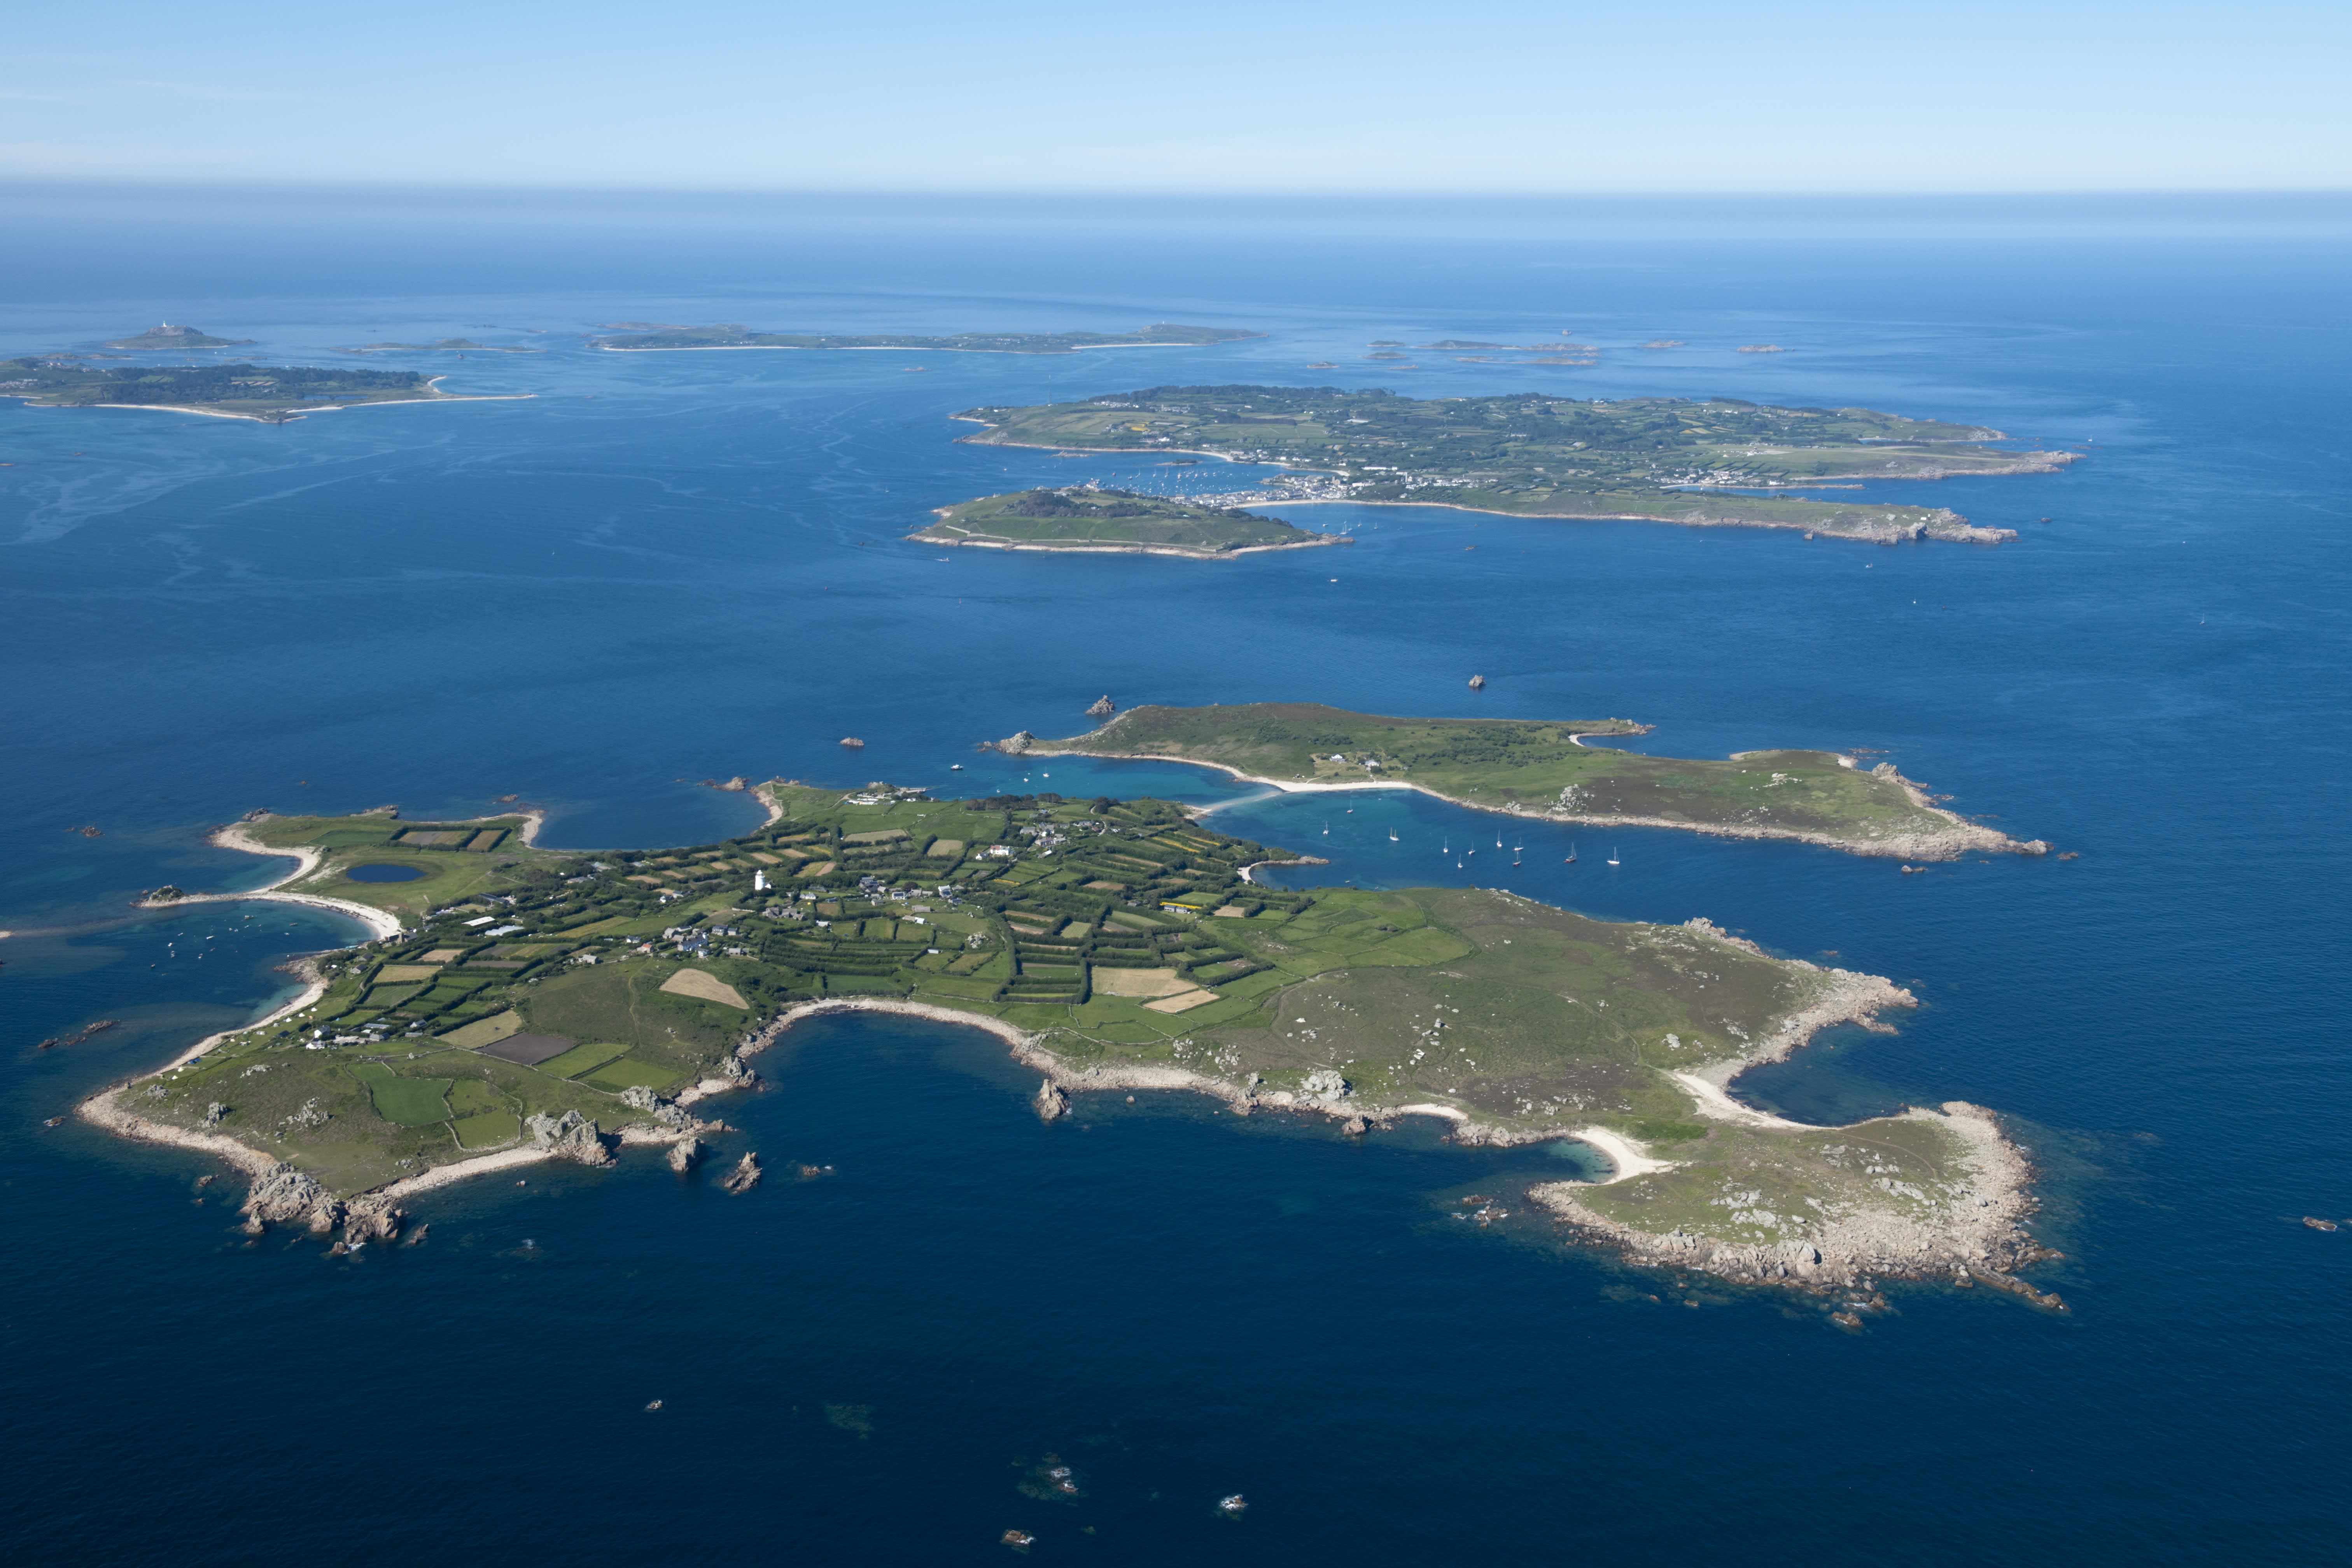 Archipelago to investigate potential of wave, tidal, driving wind power